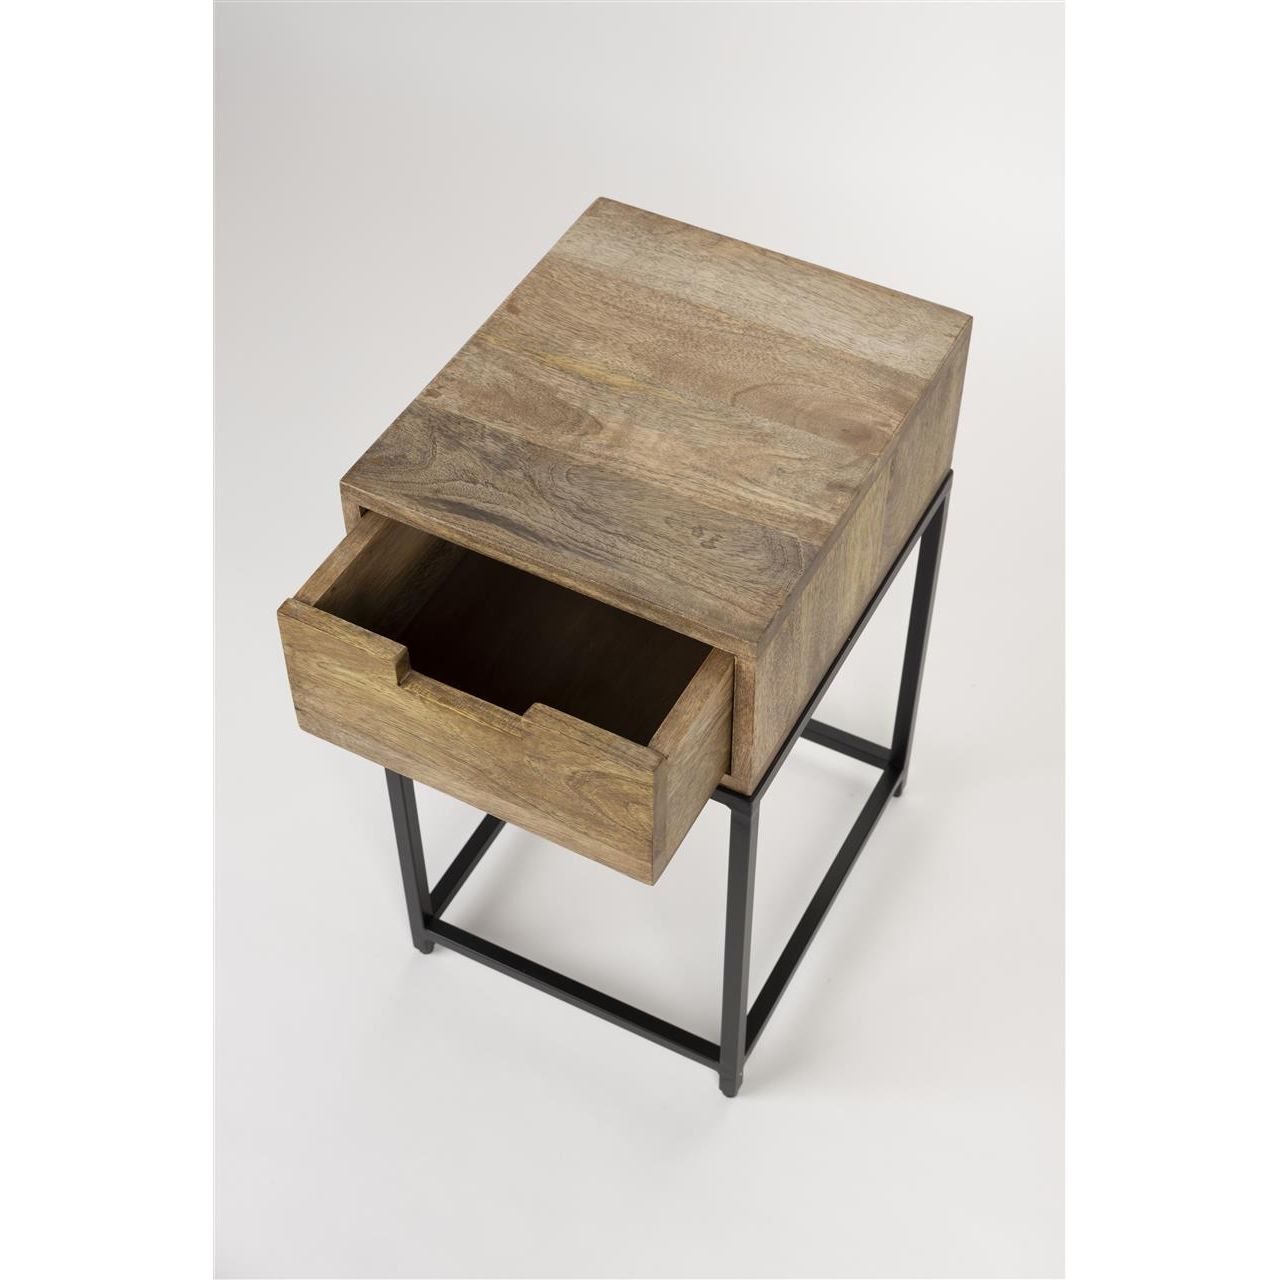 Sidetable/bed stand parcq natural